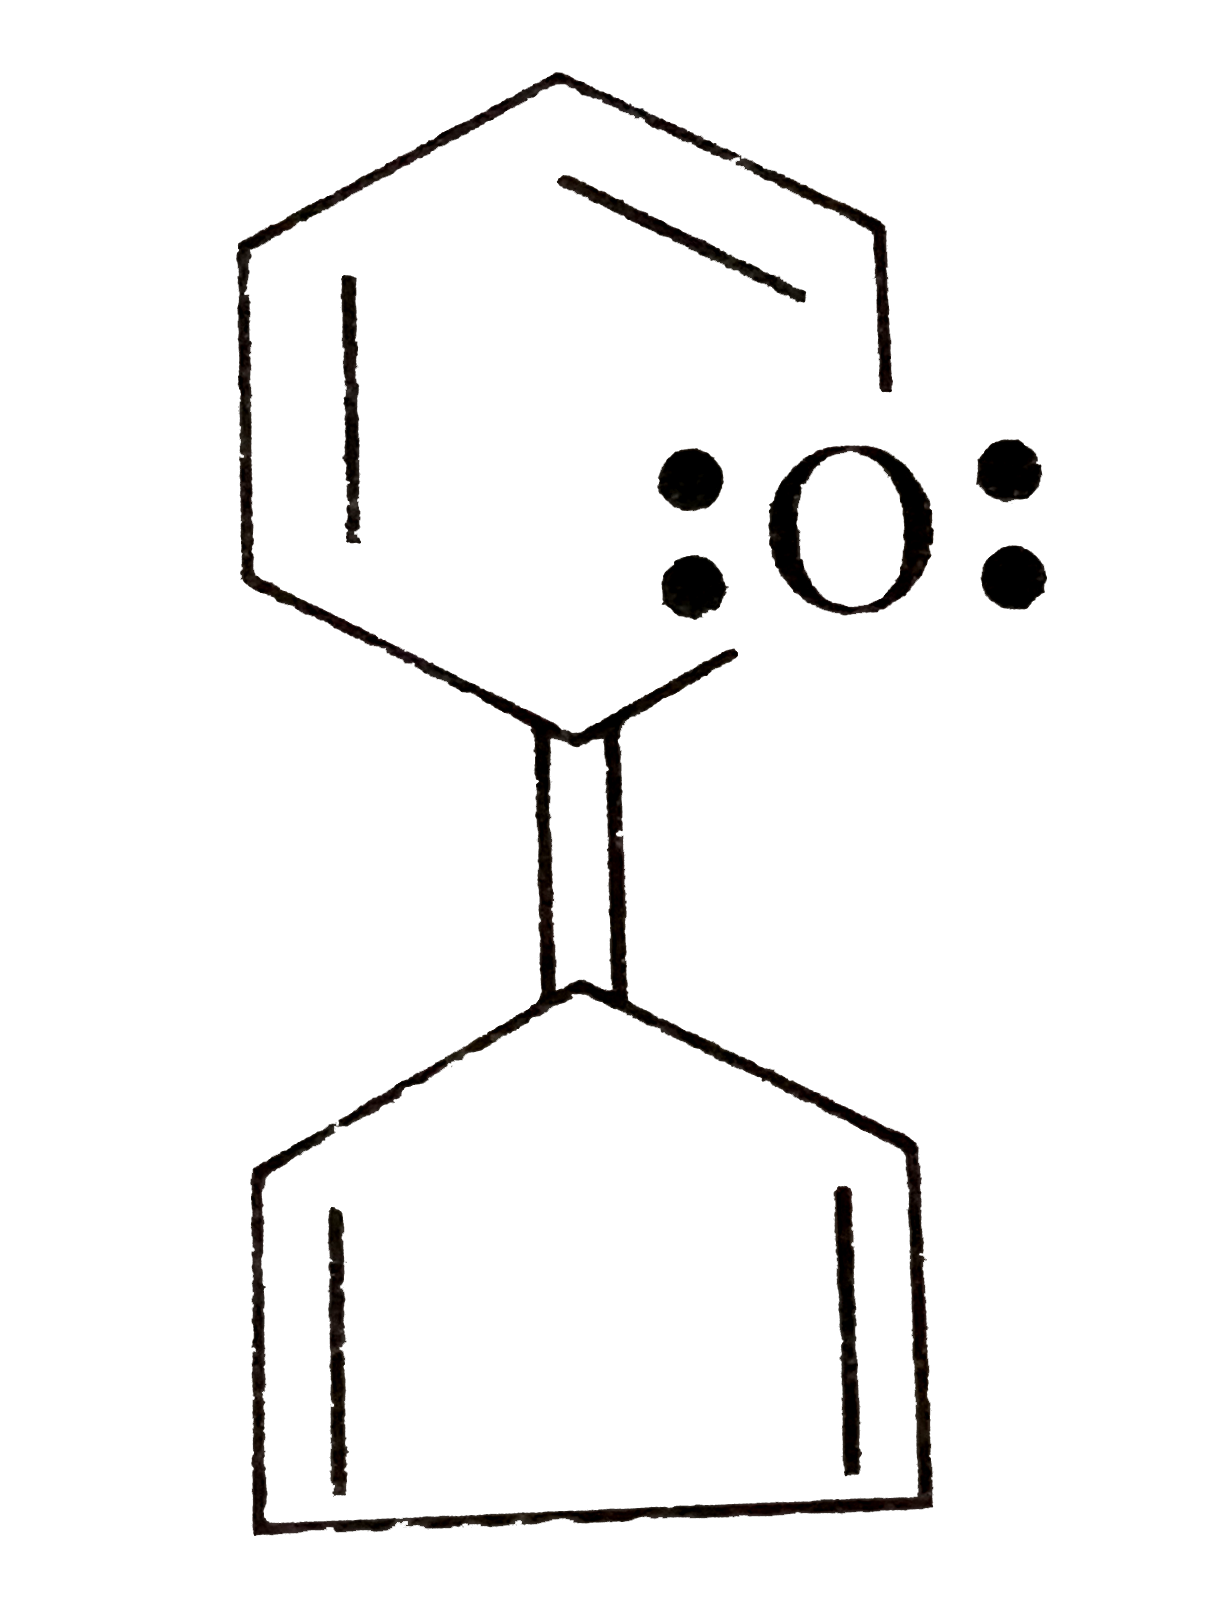 The most stable canonical structure of this molecule is :